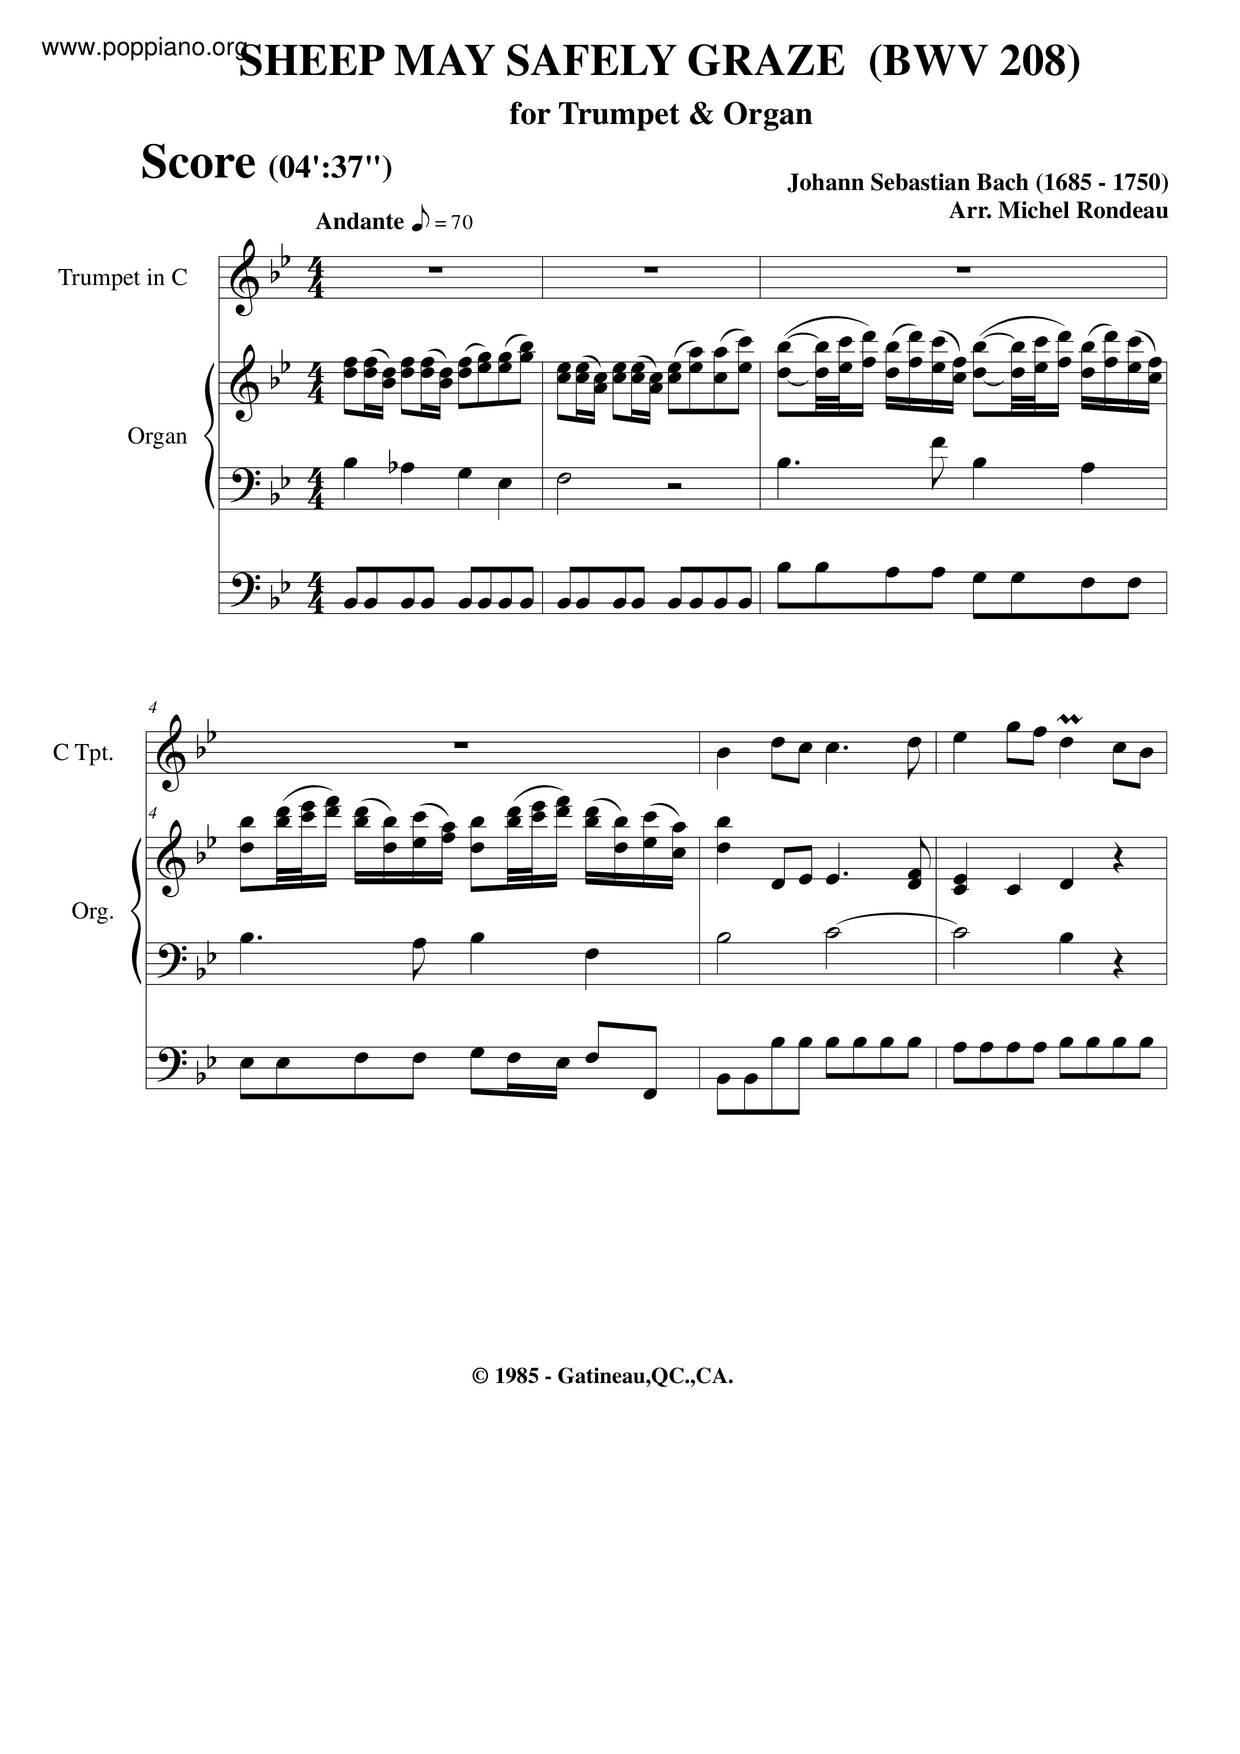 The Lively Hunt Is All My Heart's Desire, BWV 208琴谱